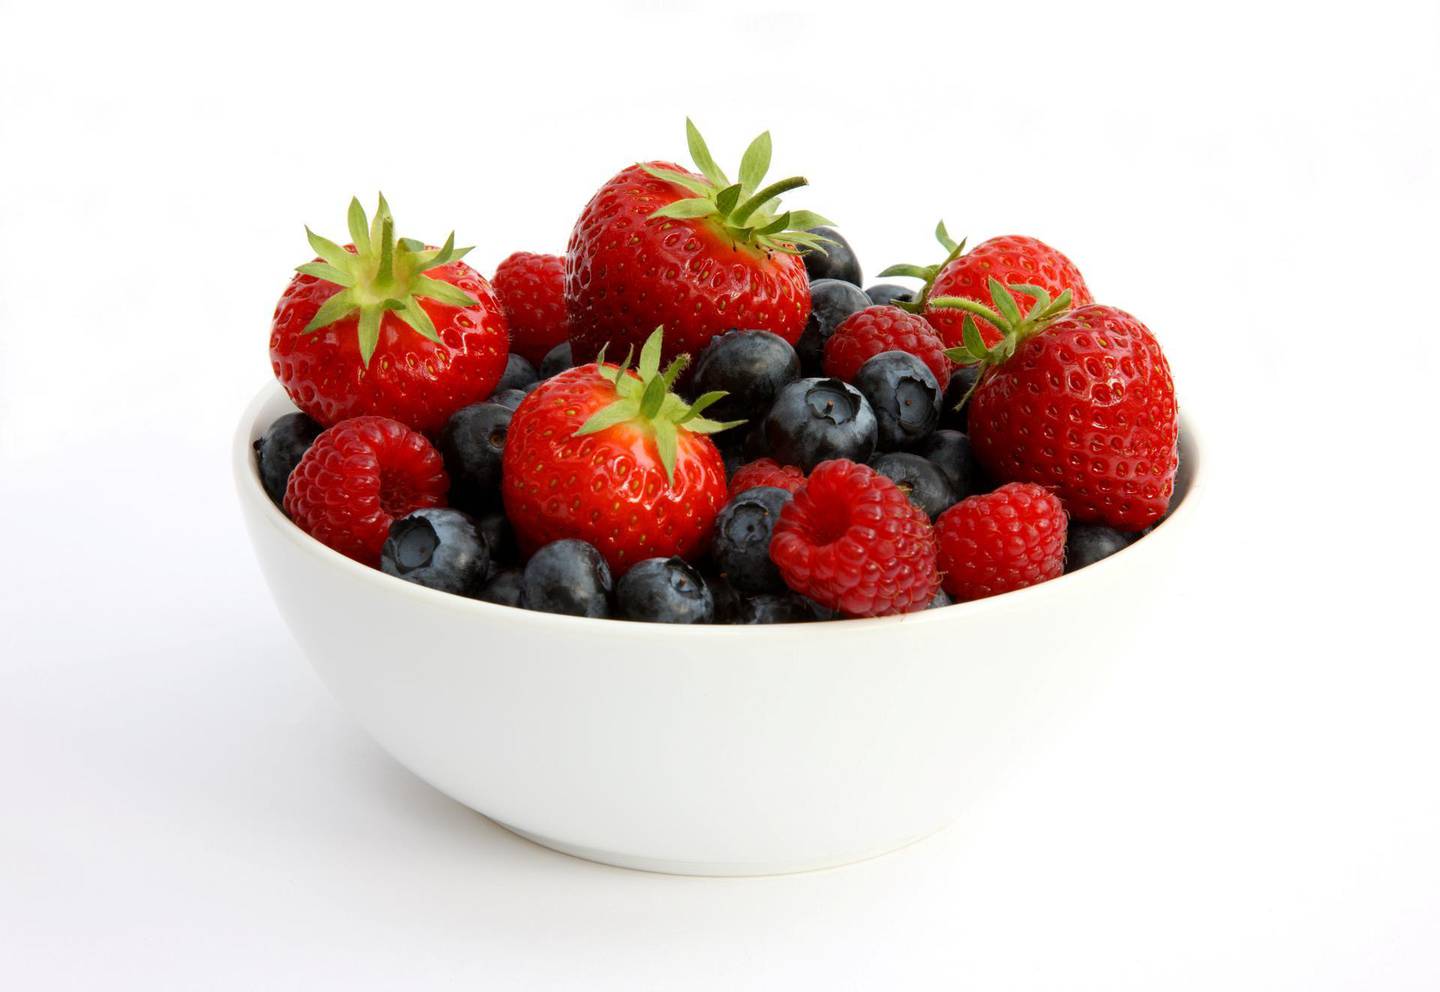 White bowl filled with newly picked home grown, organic strawberries, raspberries and blueberries, on a white background.